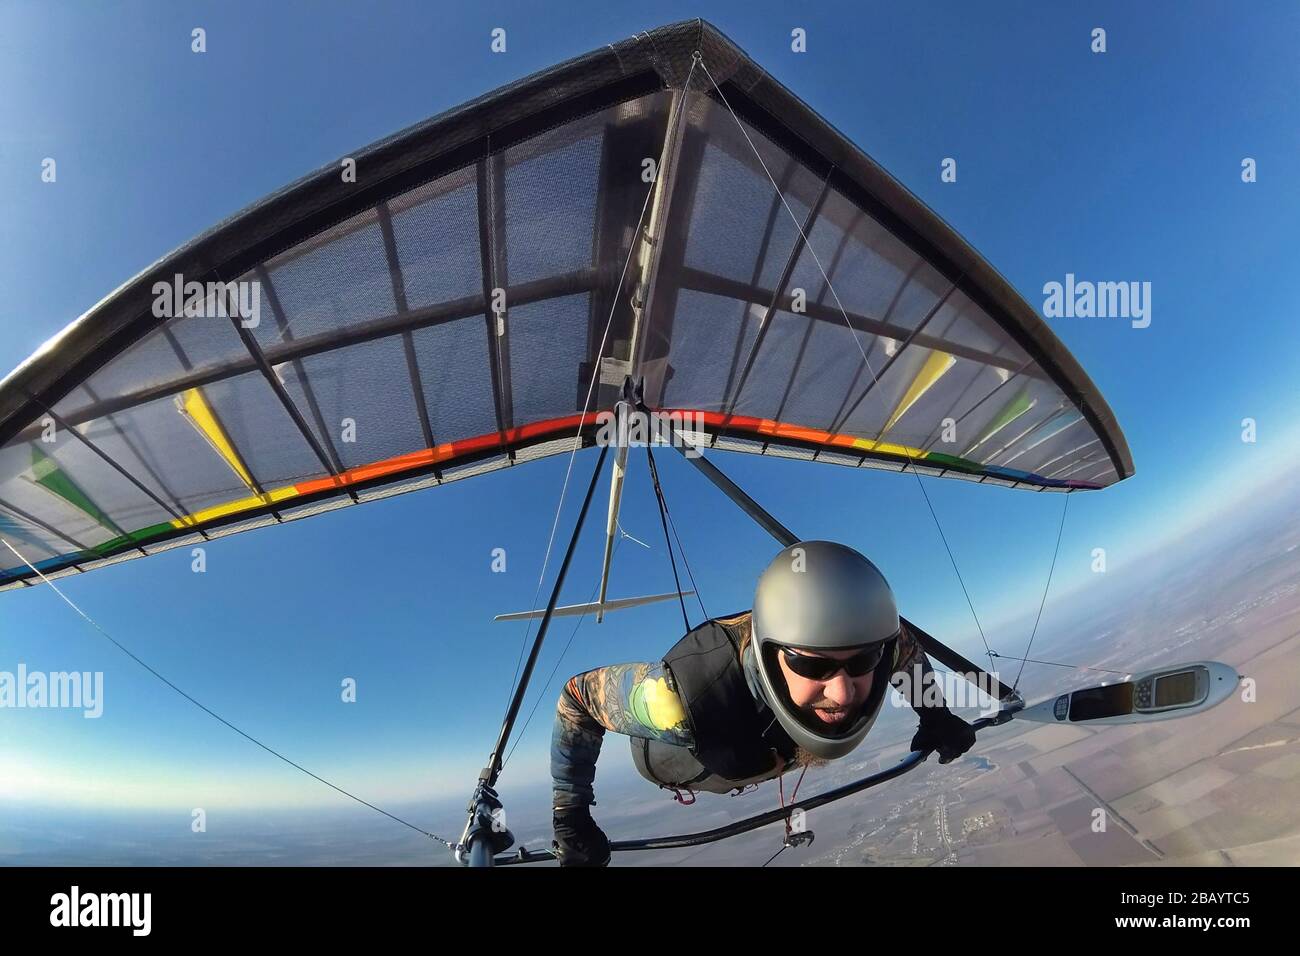 Hang glider pilot with his colorful wing flies high far away from other people. Concept of unning from crowd,self isolation and social distancing Stock Photo